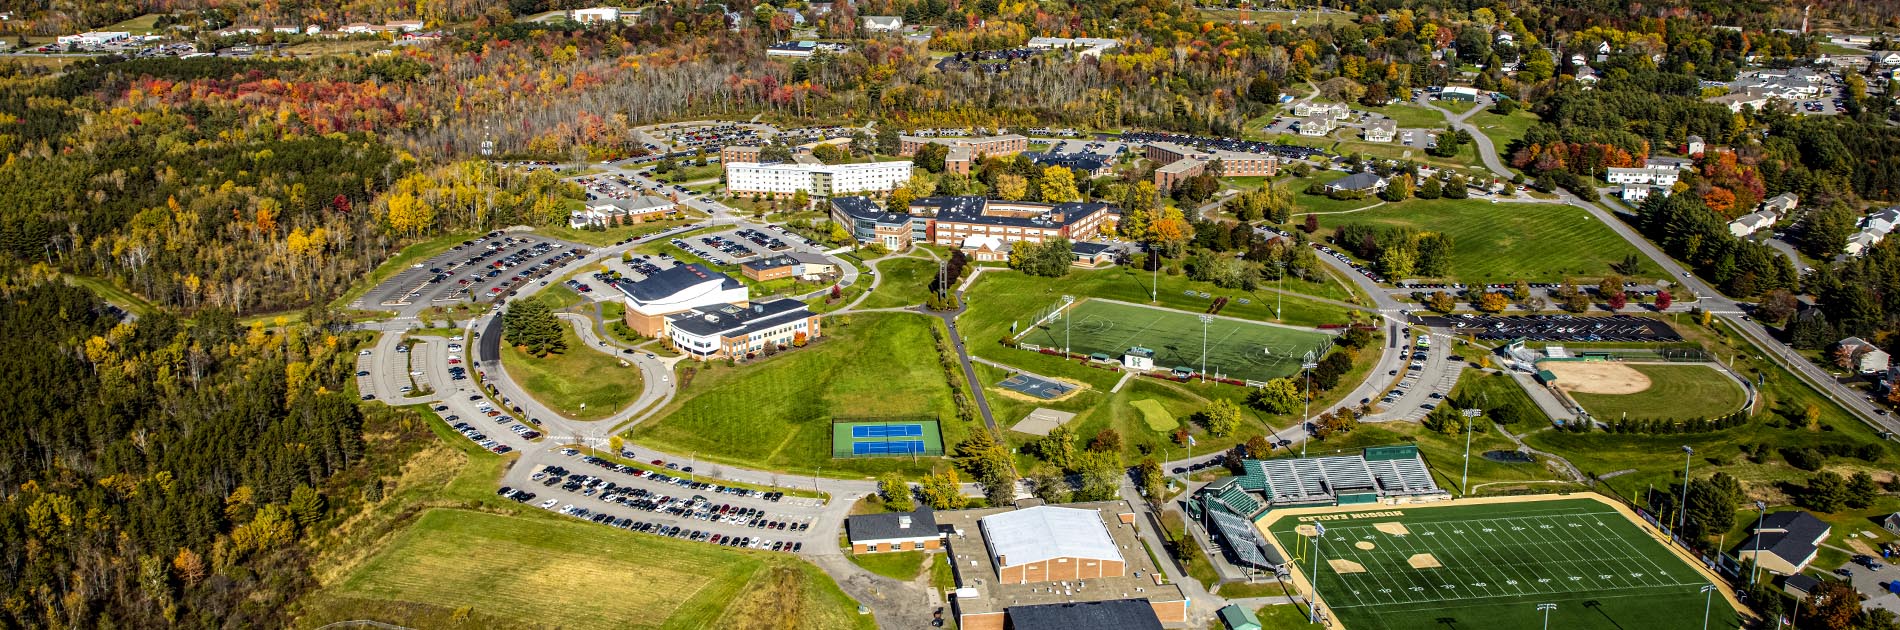 An aerial view of the Husson Campus